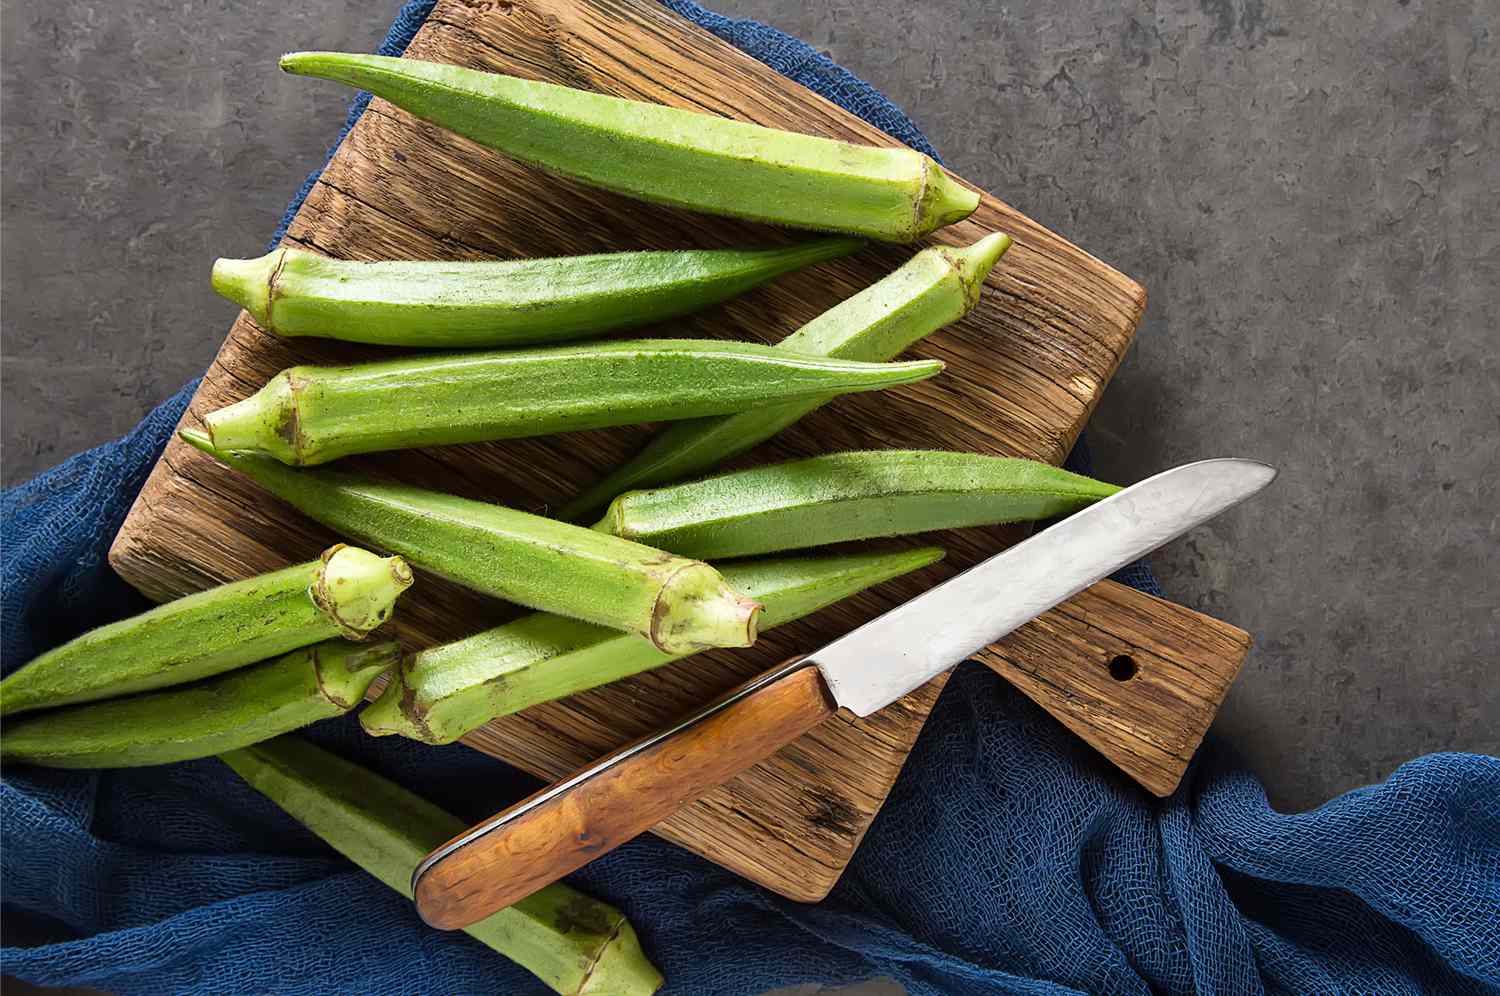 Fun Facts And Trivia About Okra's Cultural Significance In The South